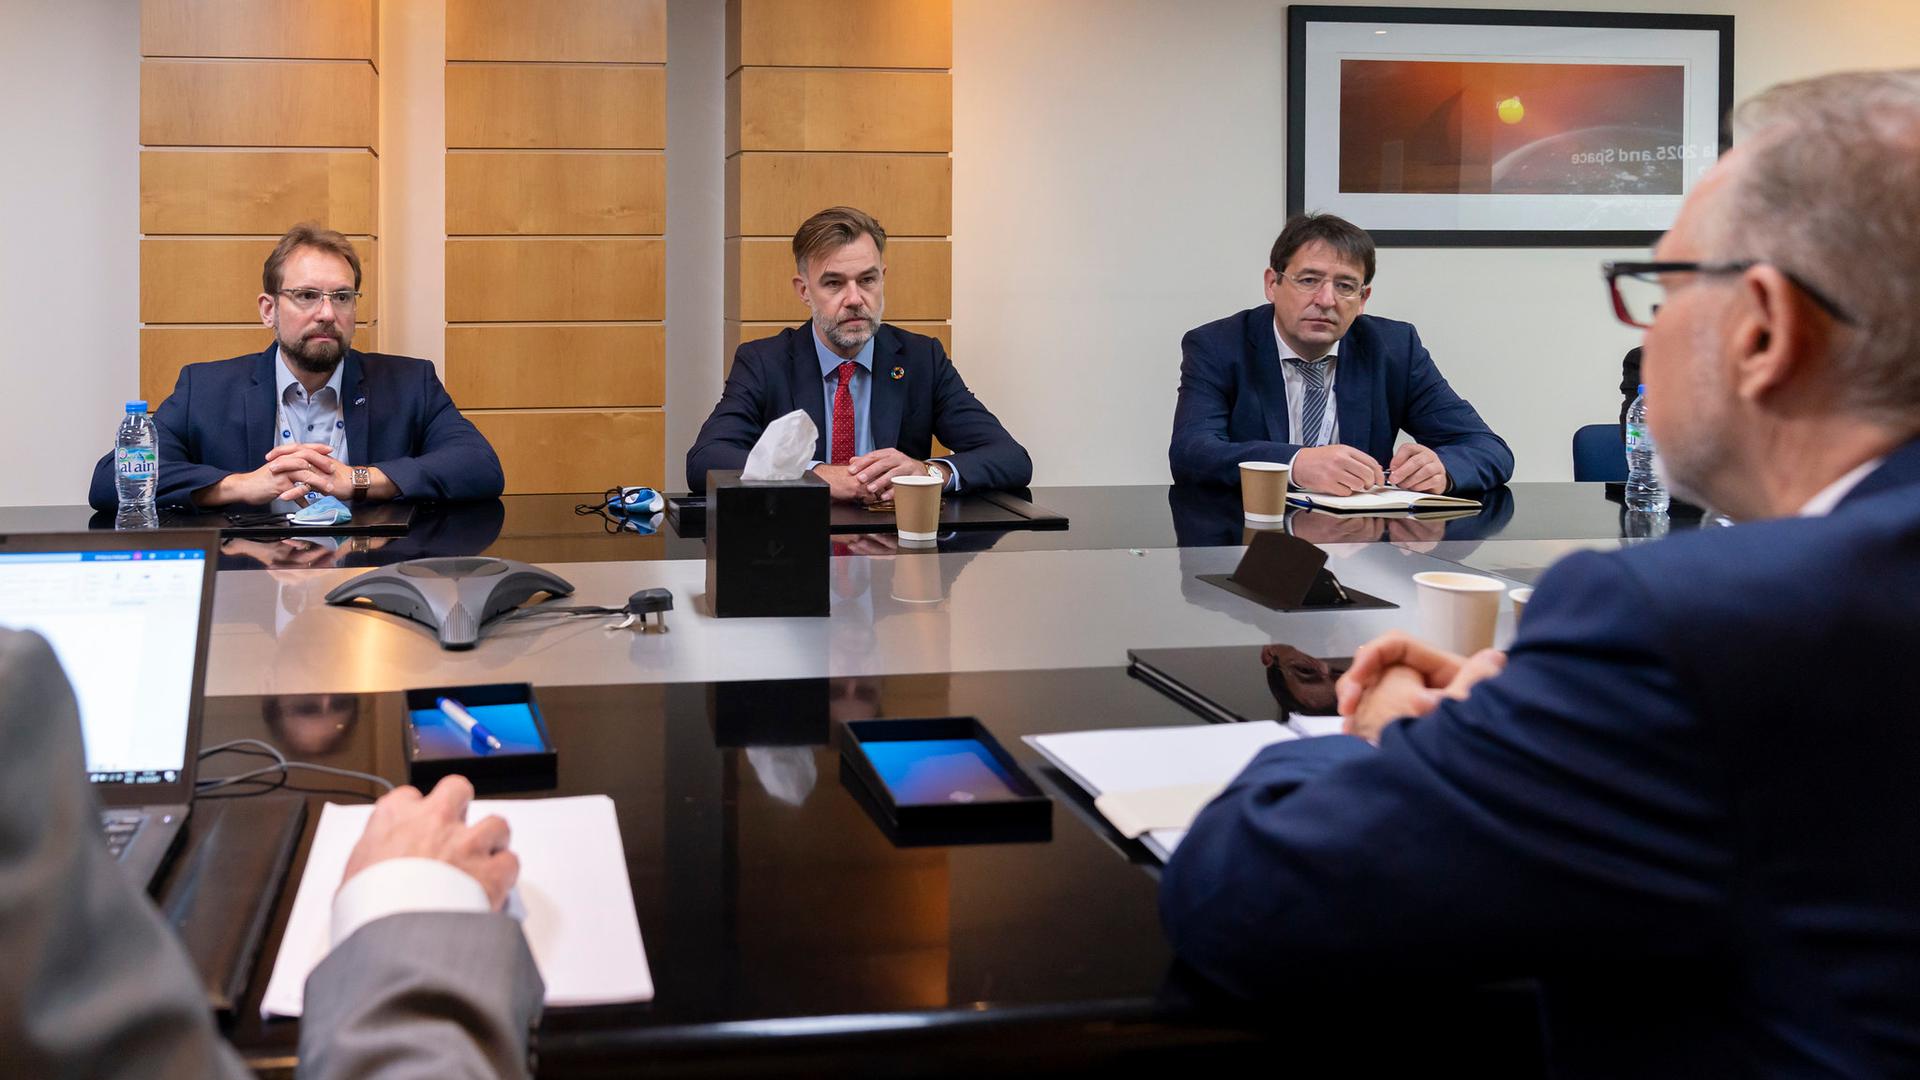 Luxembourg Minister of Economy Franz Fayot (centre) in a meeting with the European Space Agency on Tuesday in Dubai